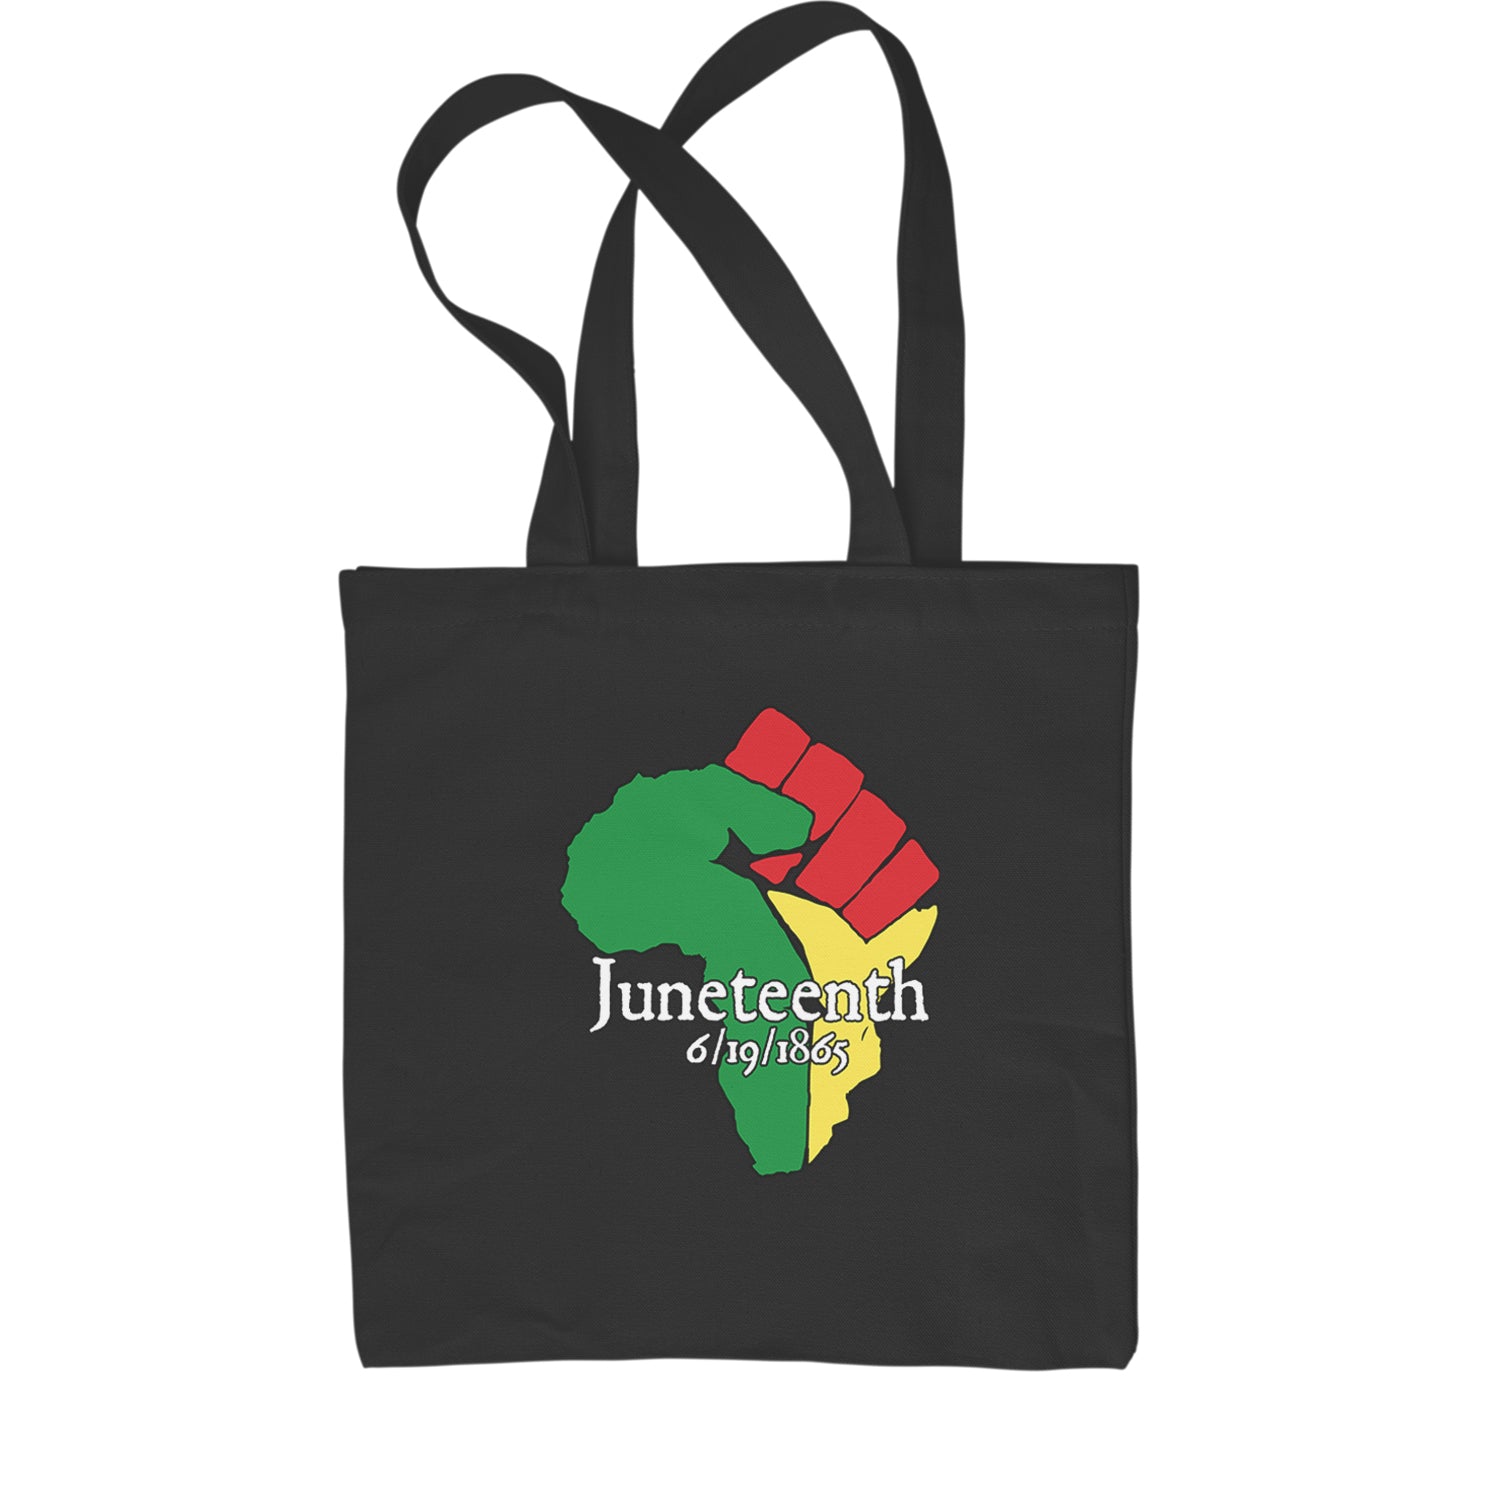 Juneteenth Raised Fist Africa Celebrate Emancipation Day Shopping Tote Bag